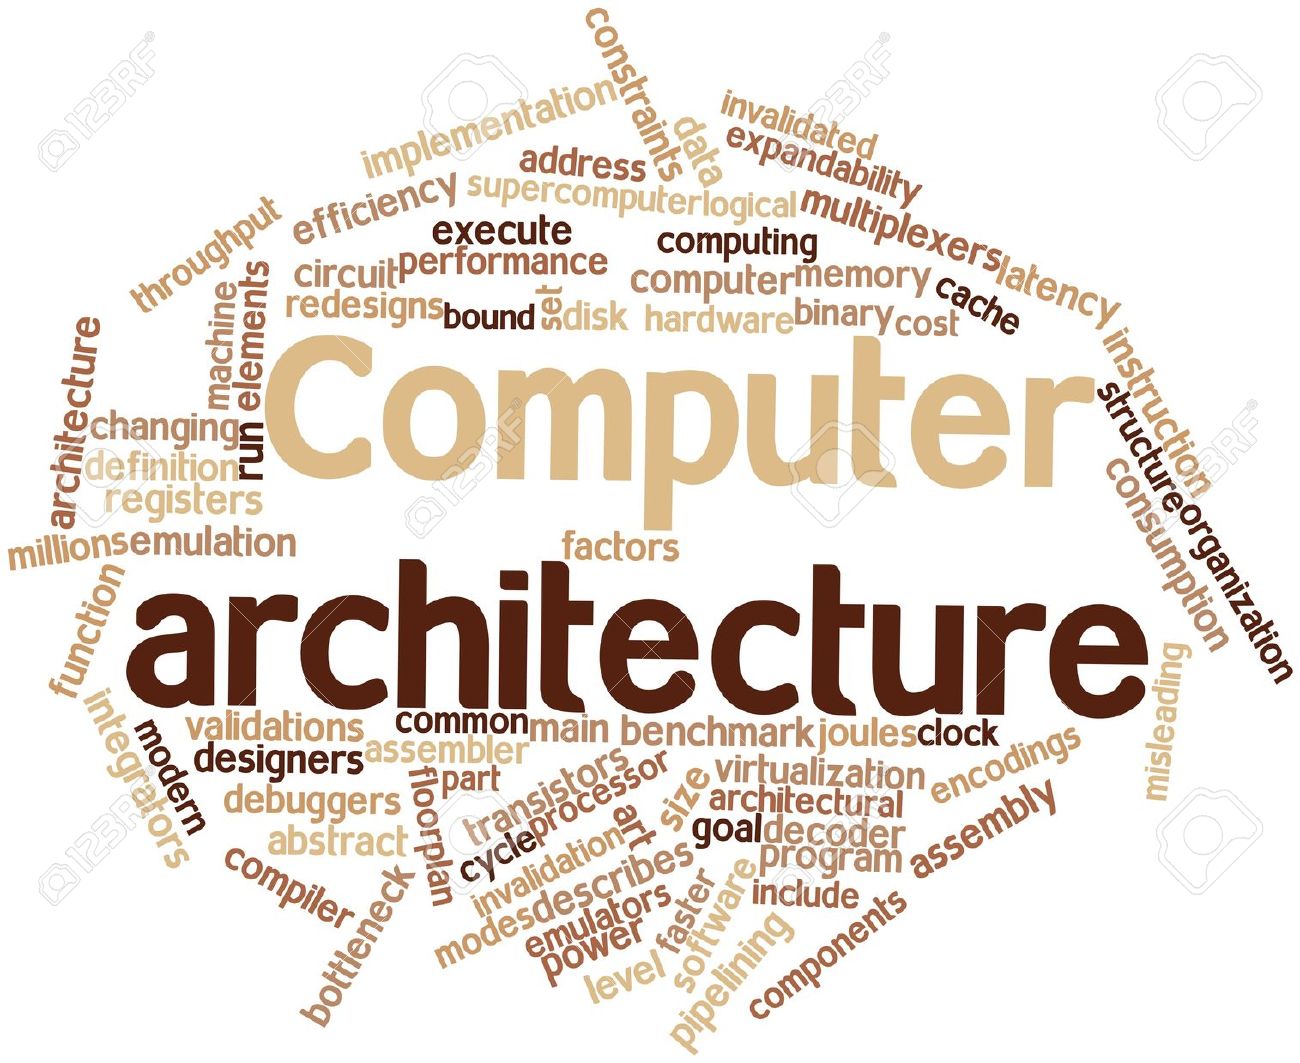 Englander architecture computer hardware systems software free